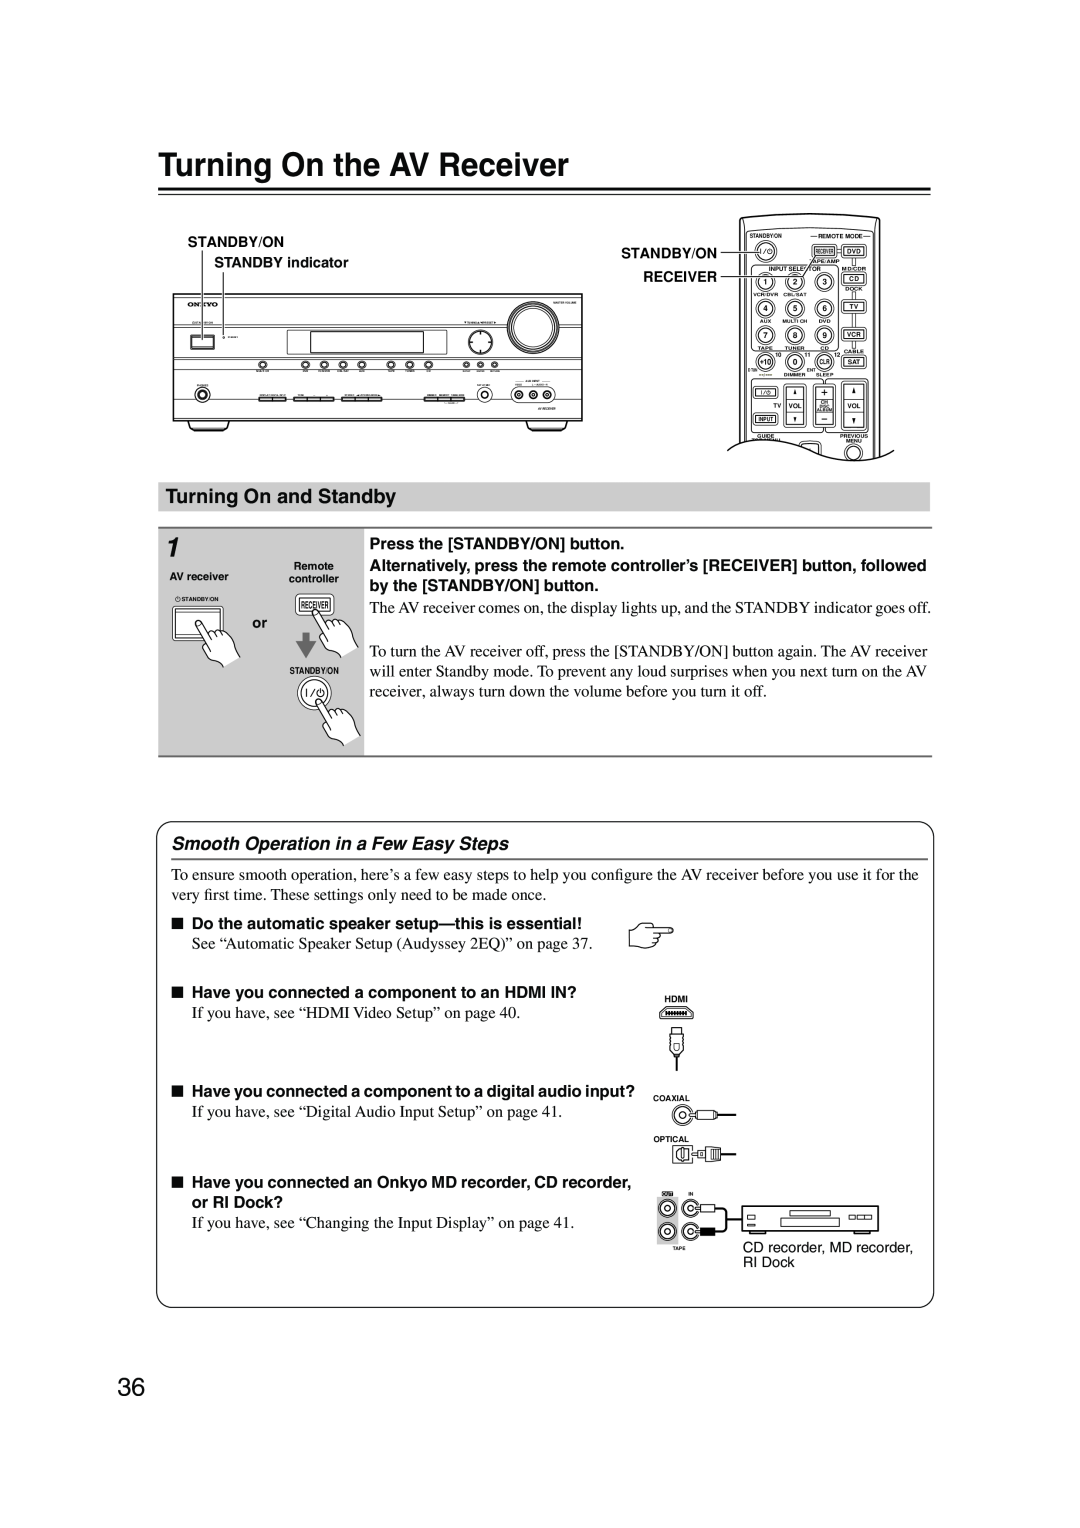 Onkyo HT-SP904 instruction manual Turning On the AV Receiver, Turning On and Standby, Smooth Operation in a Few Easy Steps 